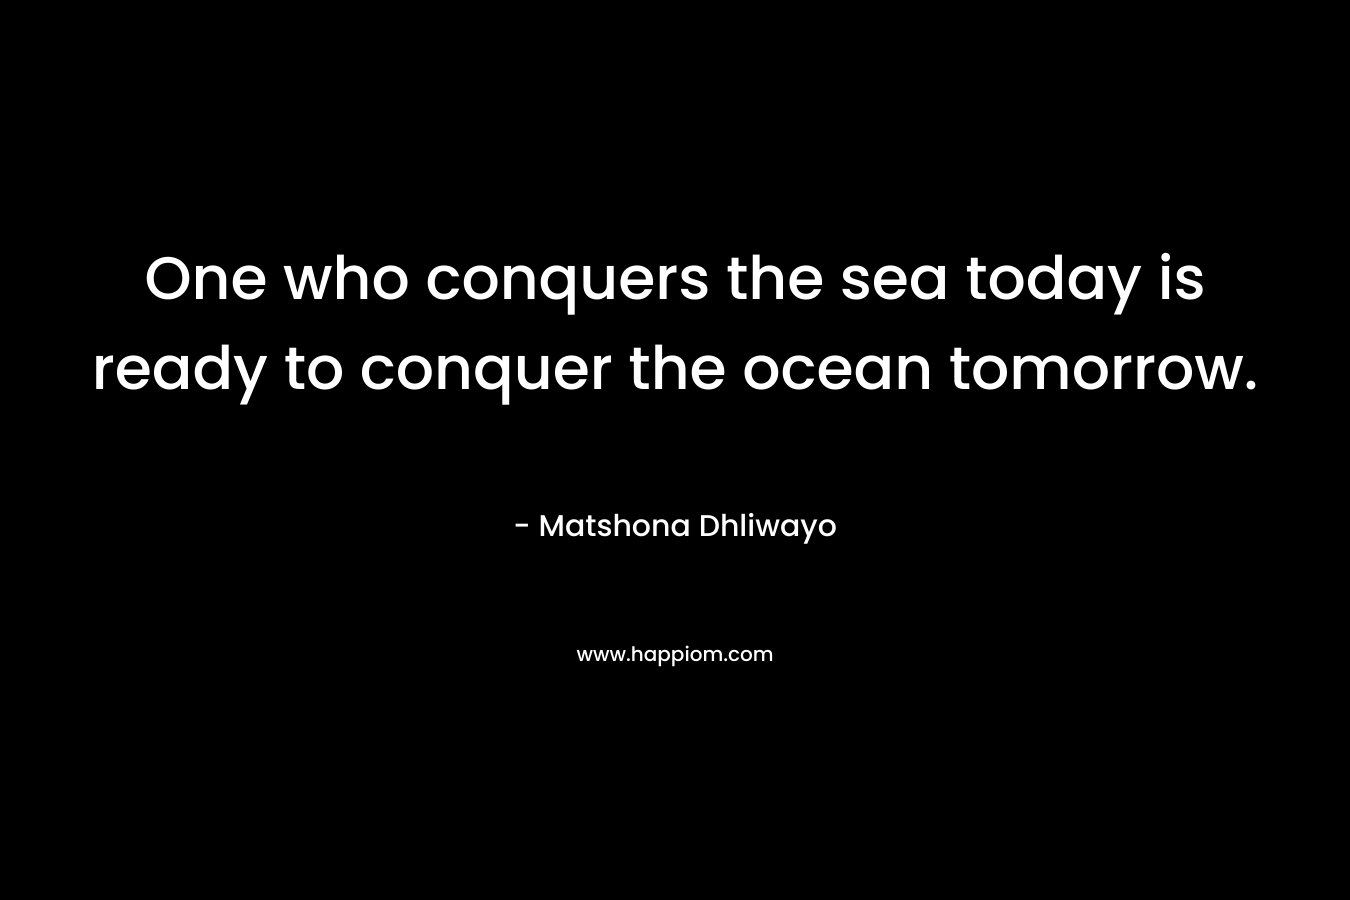 One who conquers the sea today is ready to conquer the ocean tomorrow.